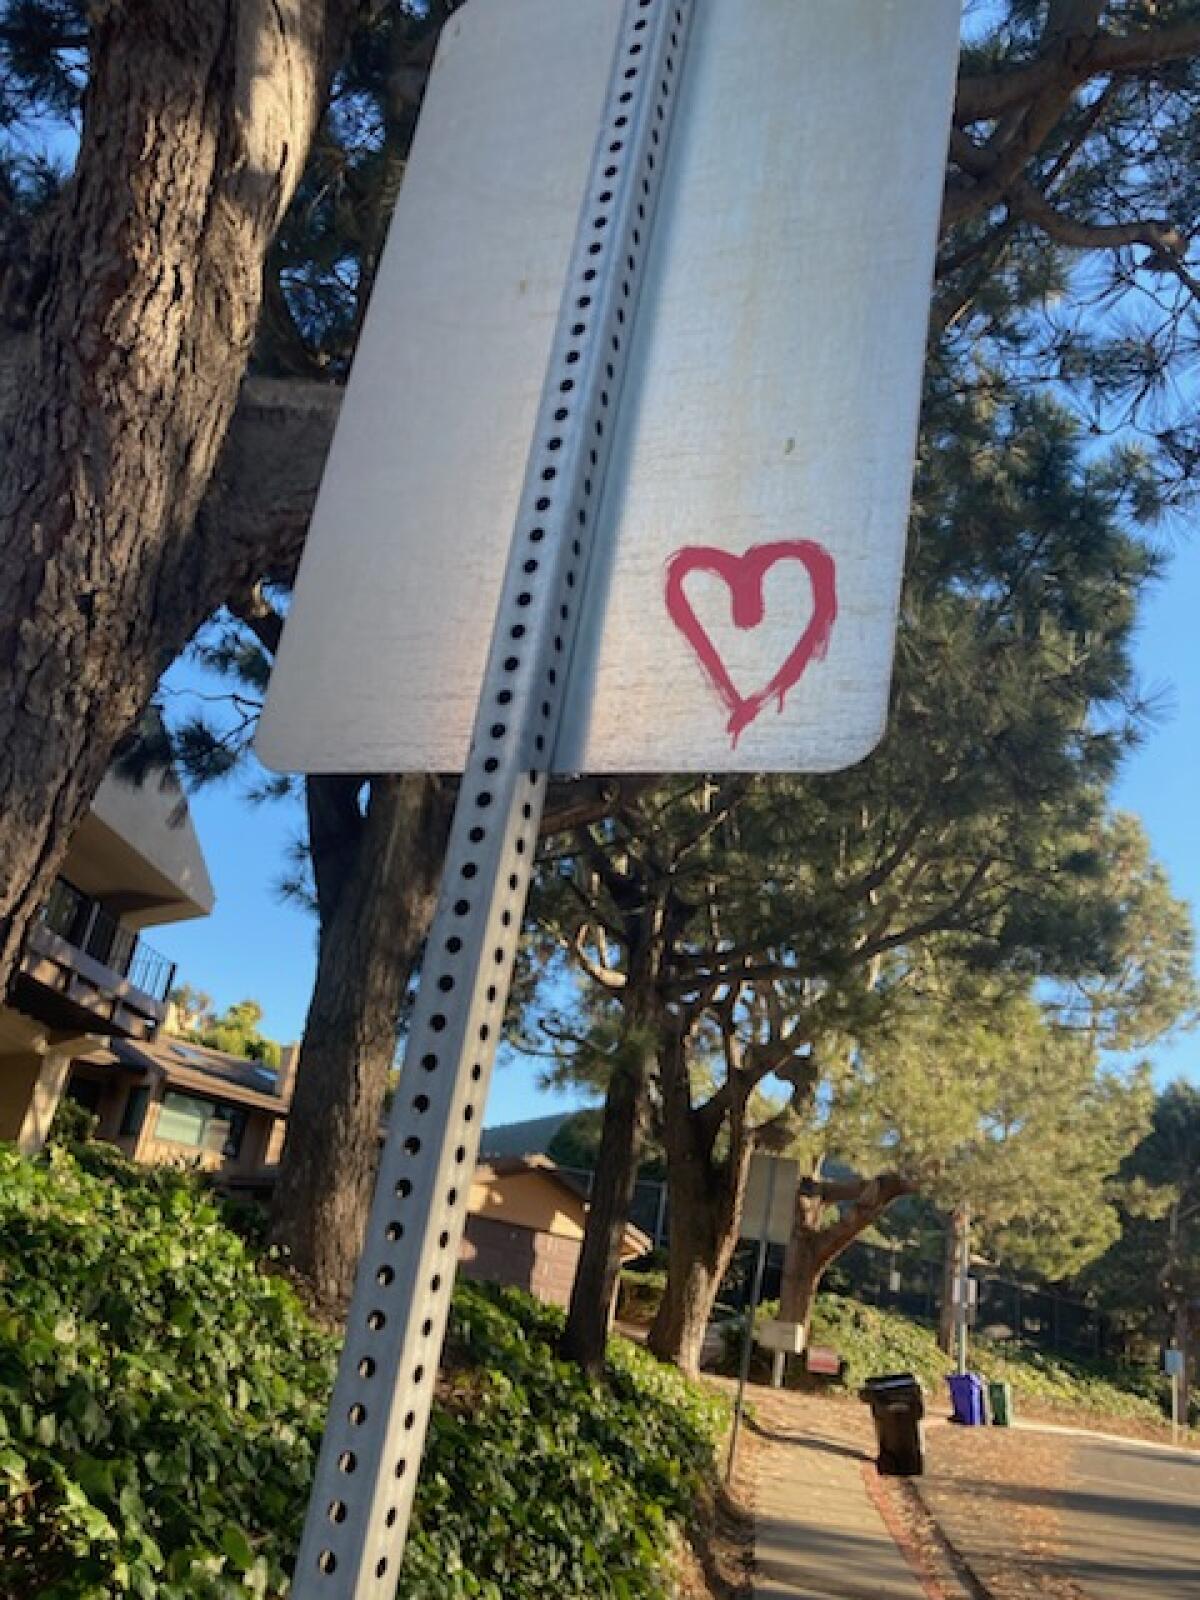 Many of the graffiti hearts have been painted on street signs.